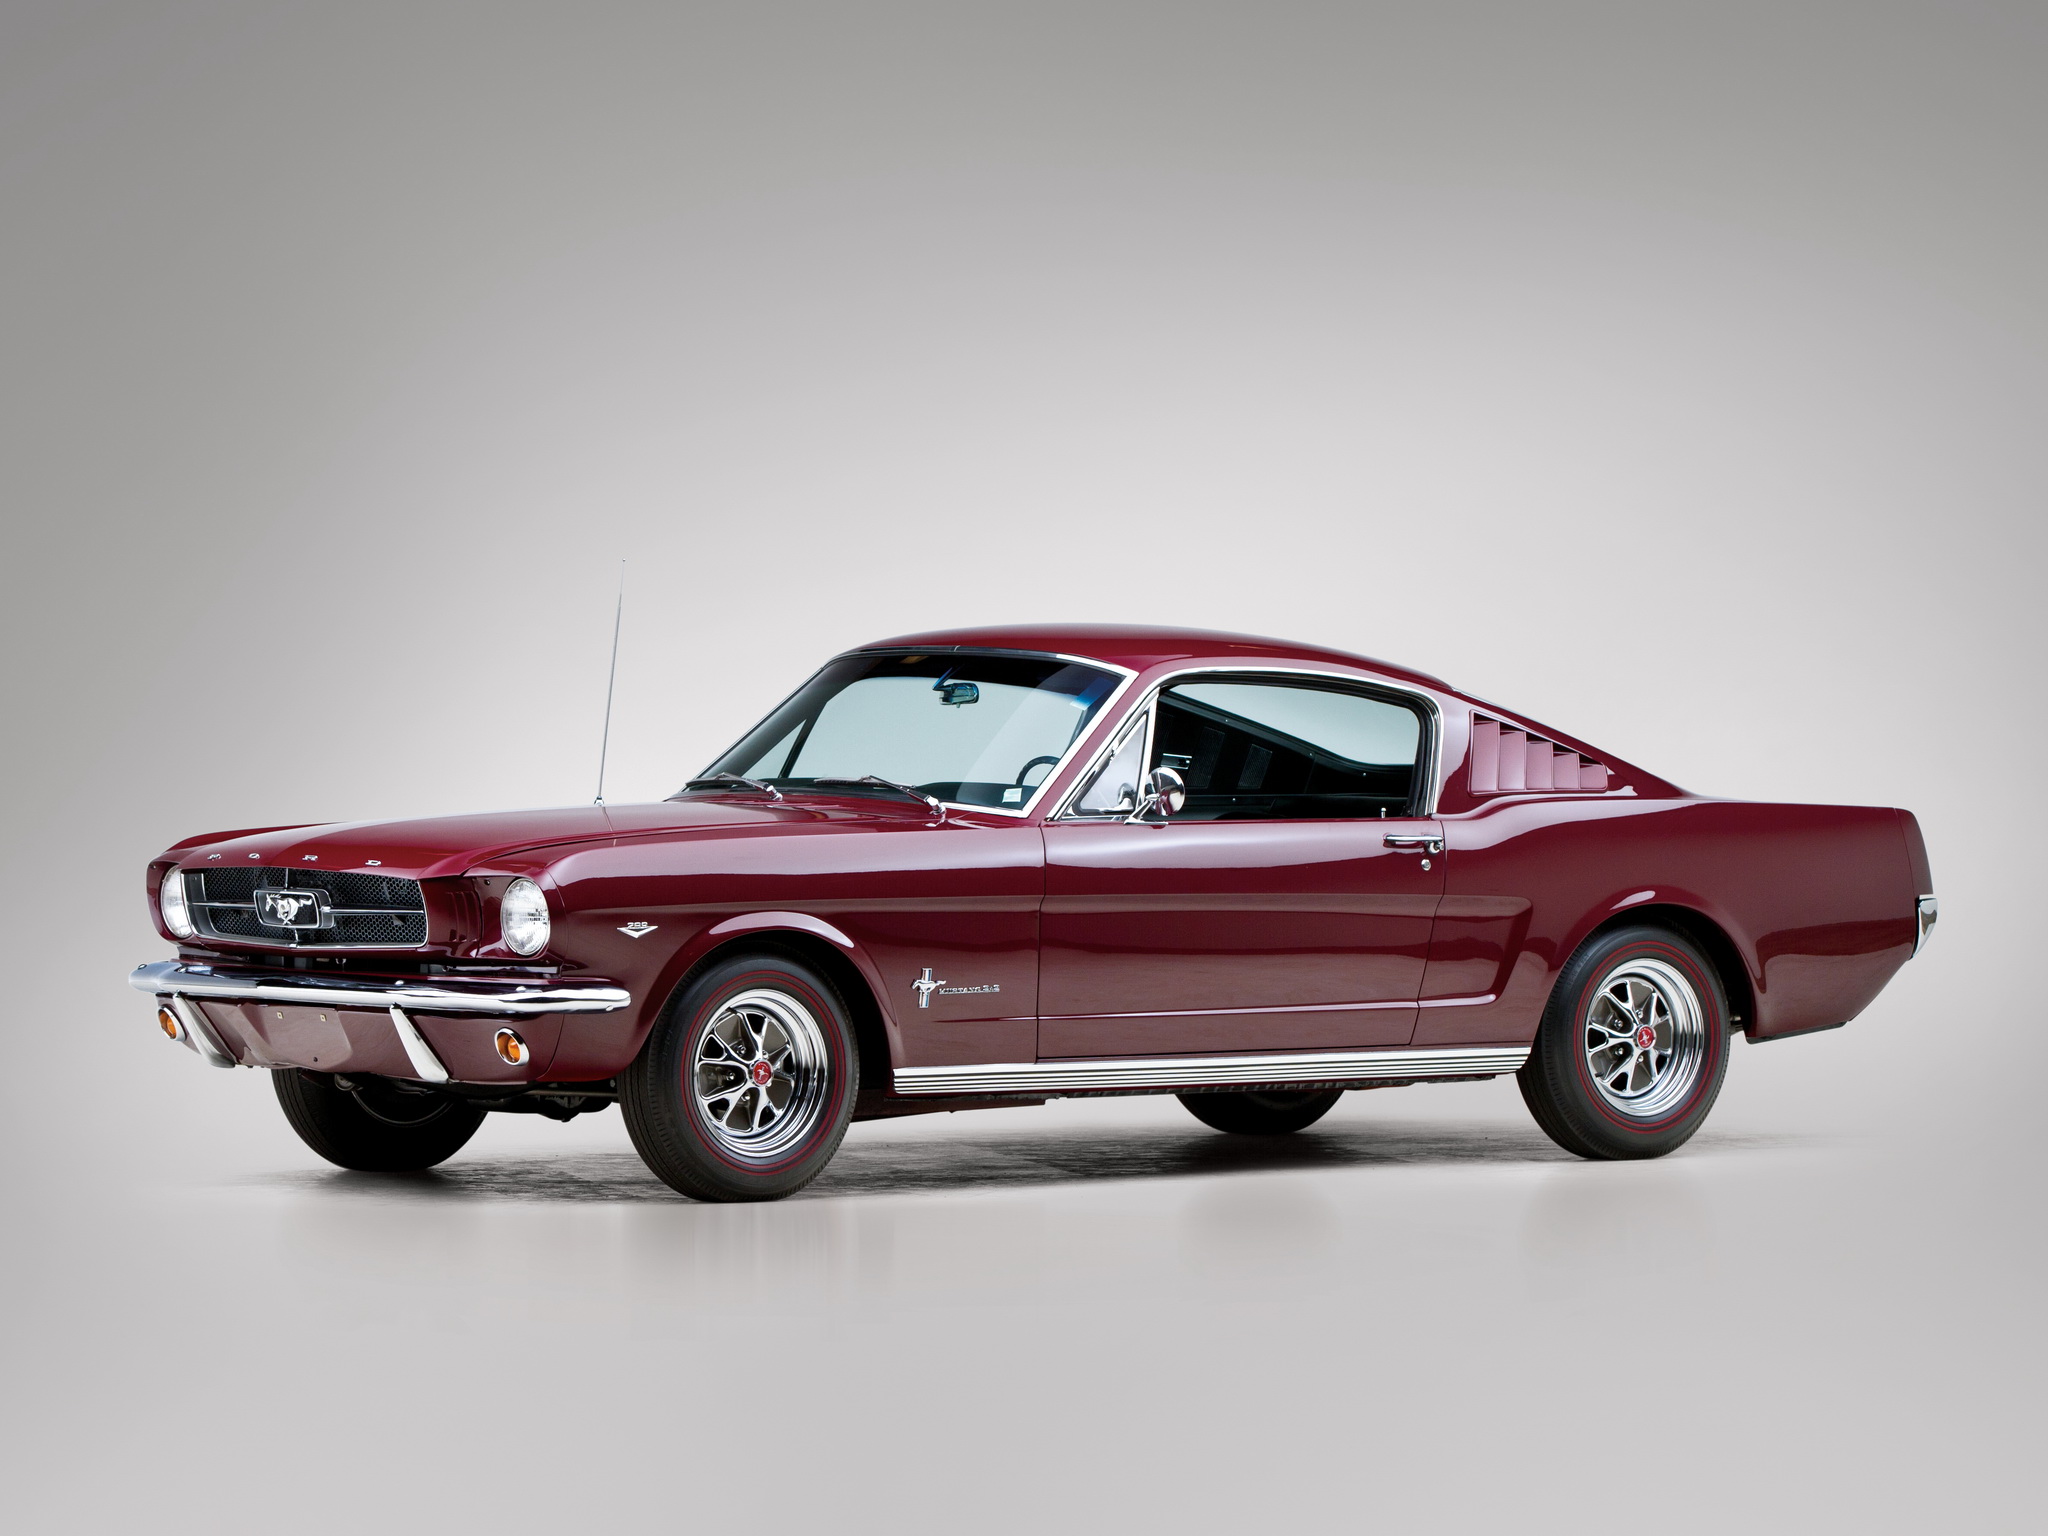 Ford Mustang Fastback Muscle Classic Fs Wallpaper